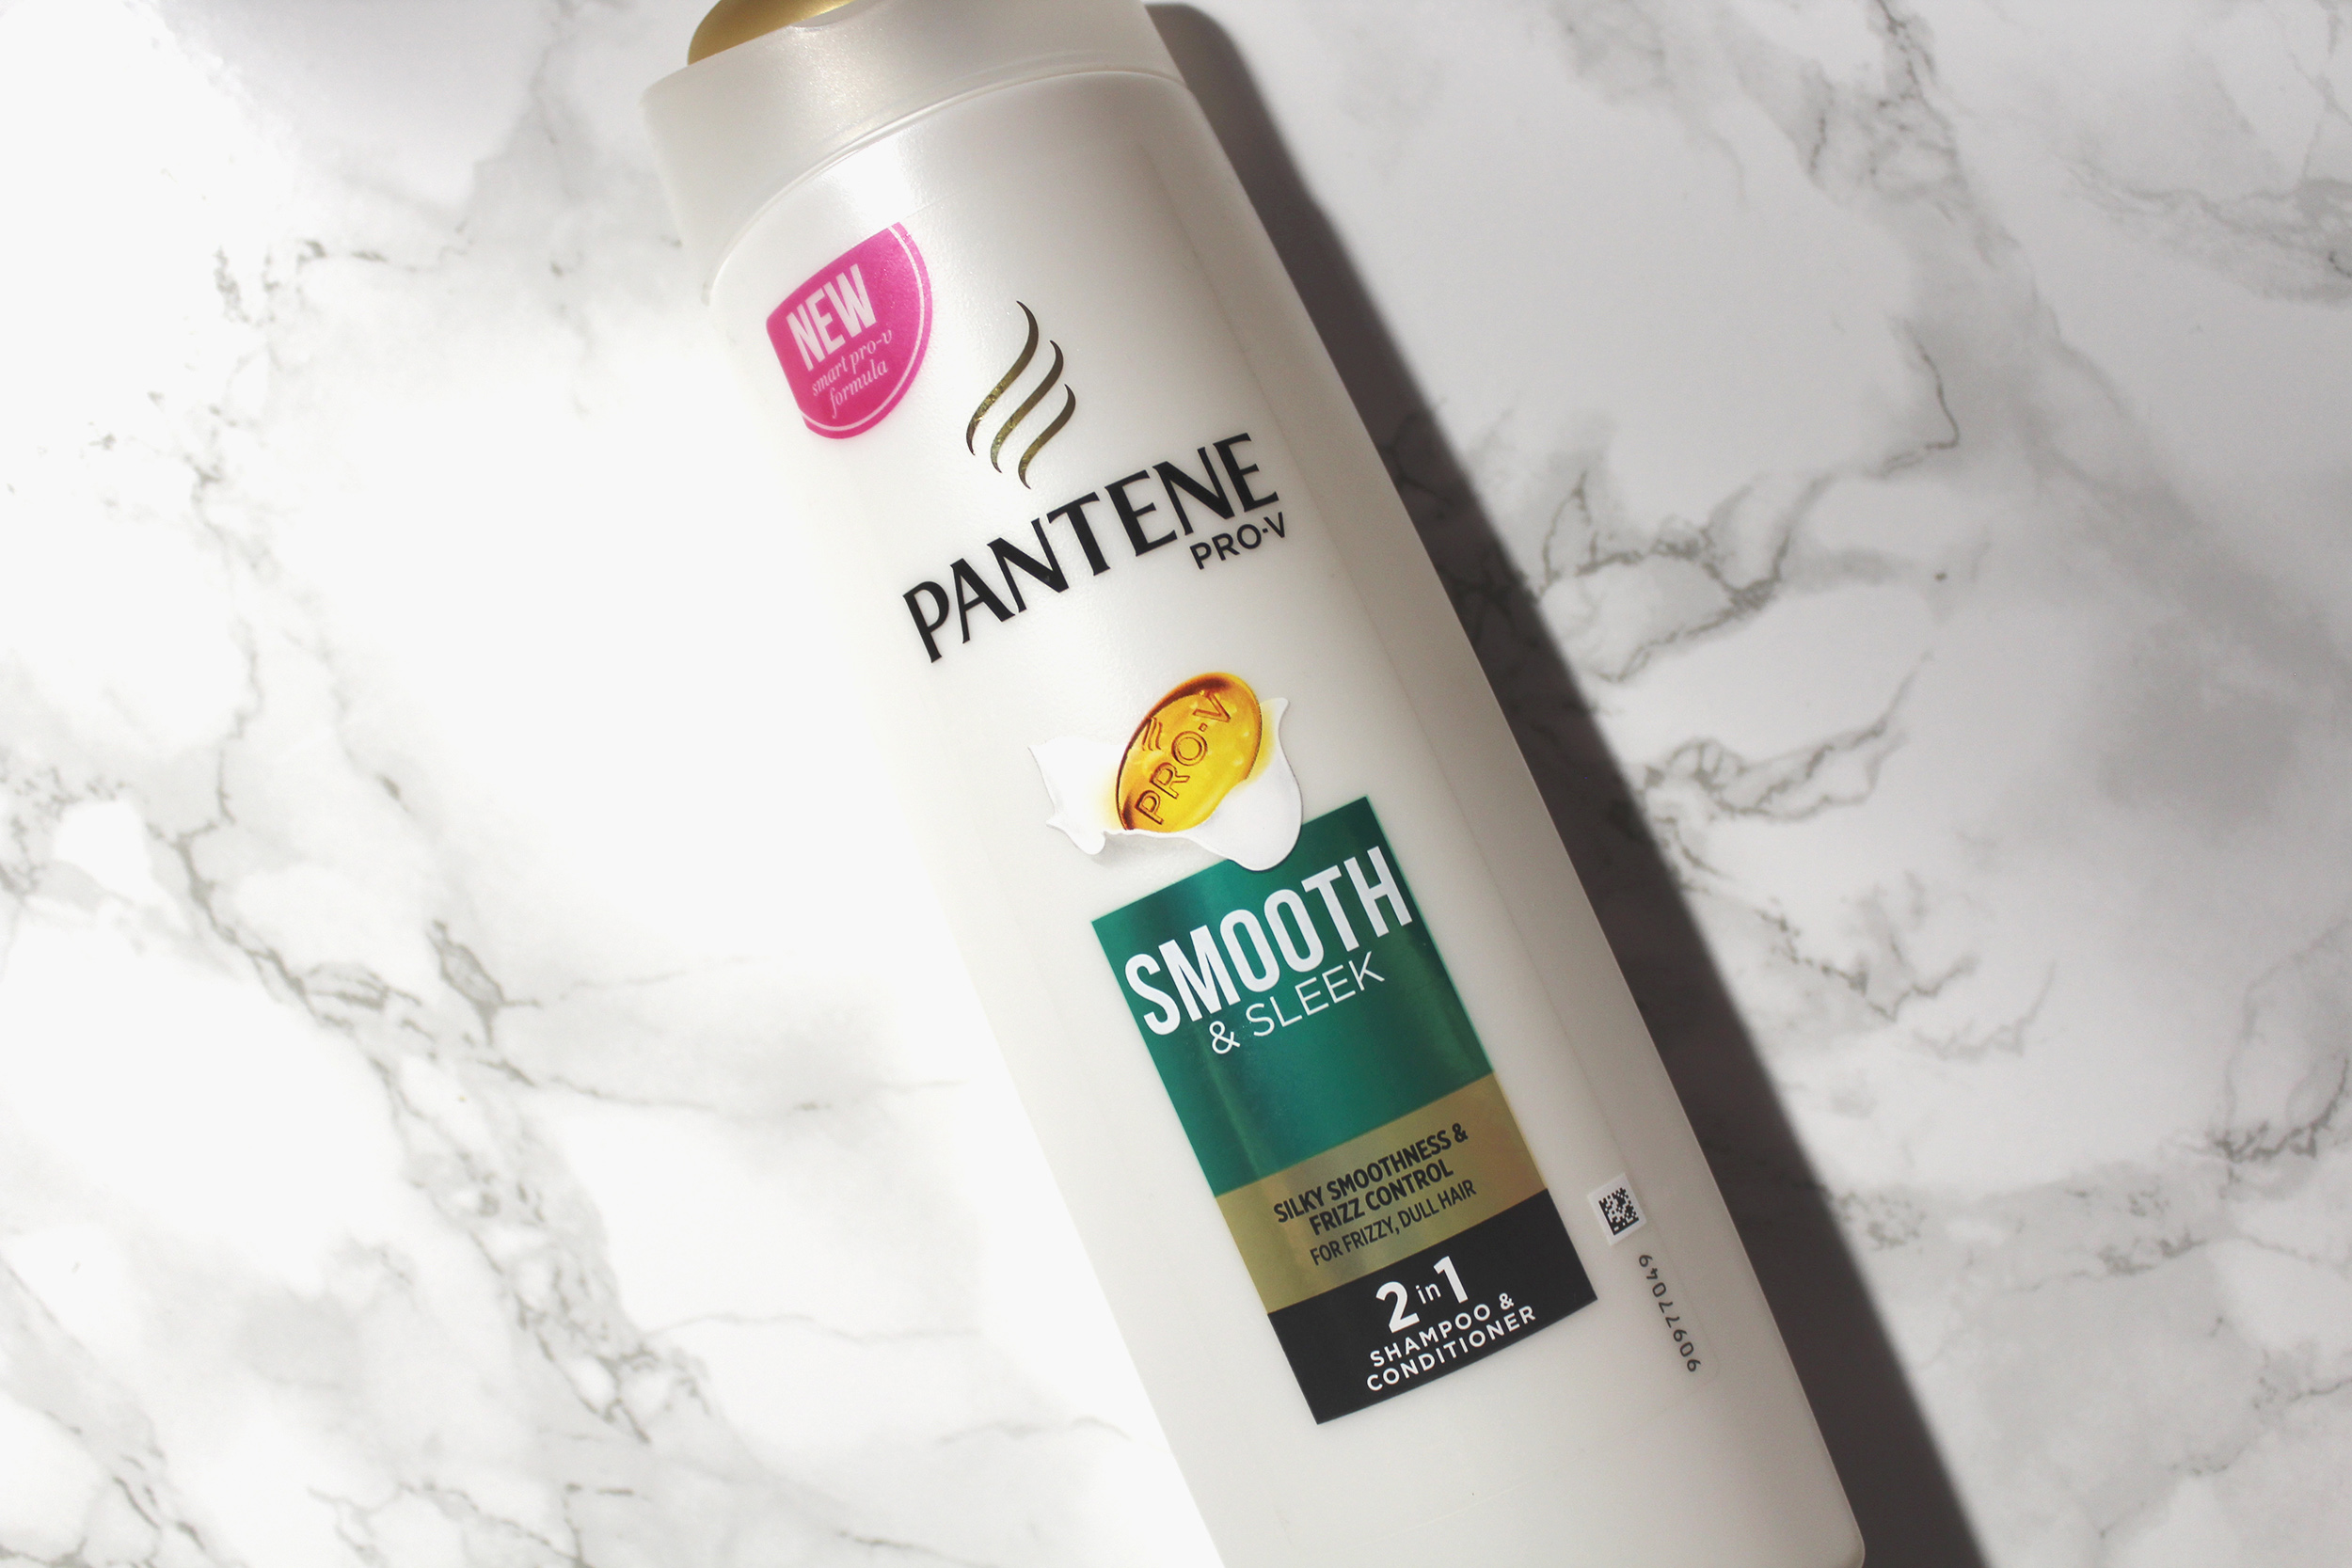 Pantene Smooth & Sleek 2 in 1 Shampoo and Conditioner